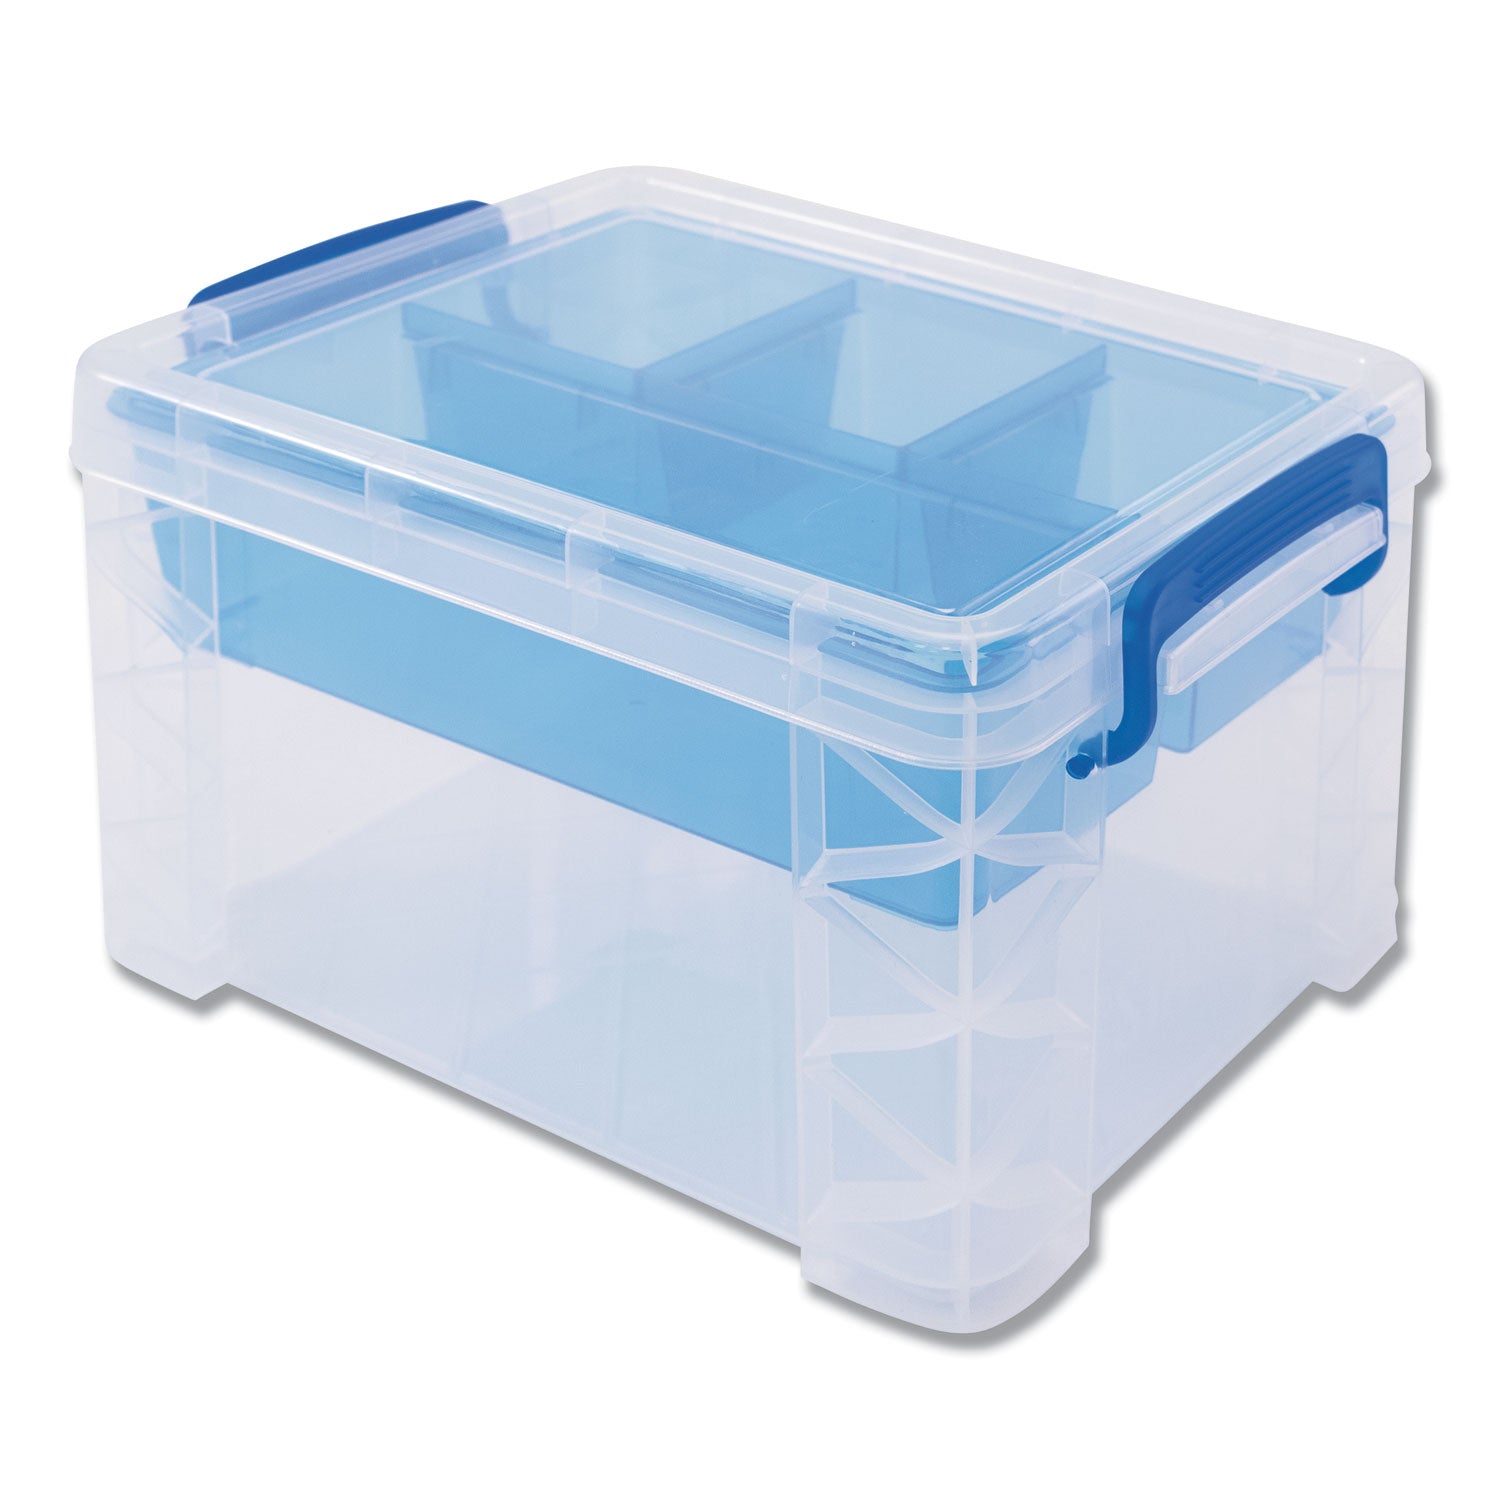 super-stacker-divided-storage-box-5-sections-75-x-1013-x-65-clear-blue_avt37375 - 1